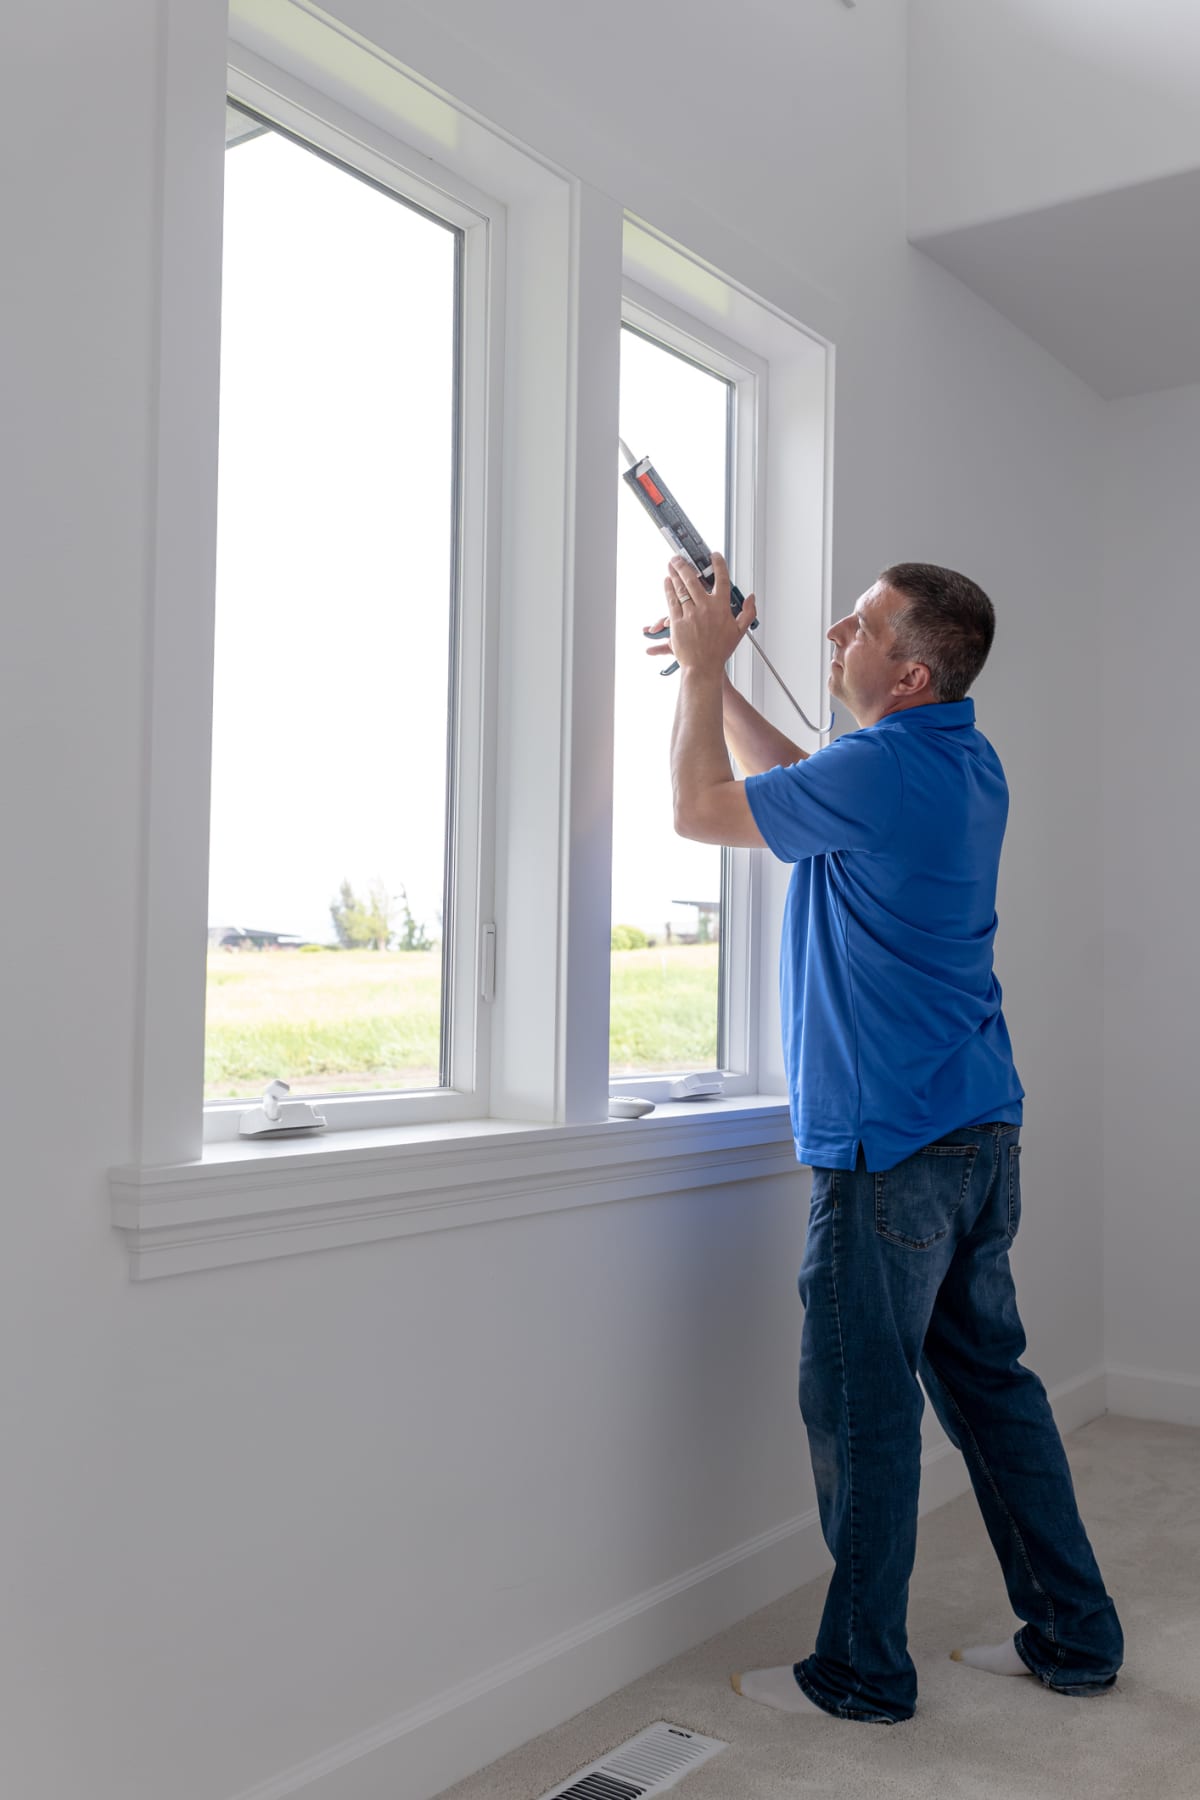 A male homeowner in casual clothing uses a caulk gun when updating his home with new energy efficient windows to make the home more sustainable.